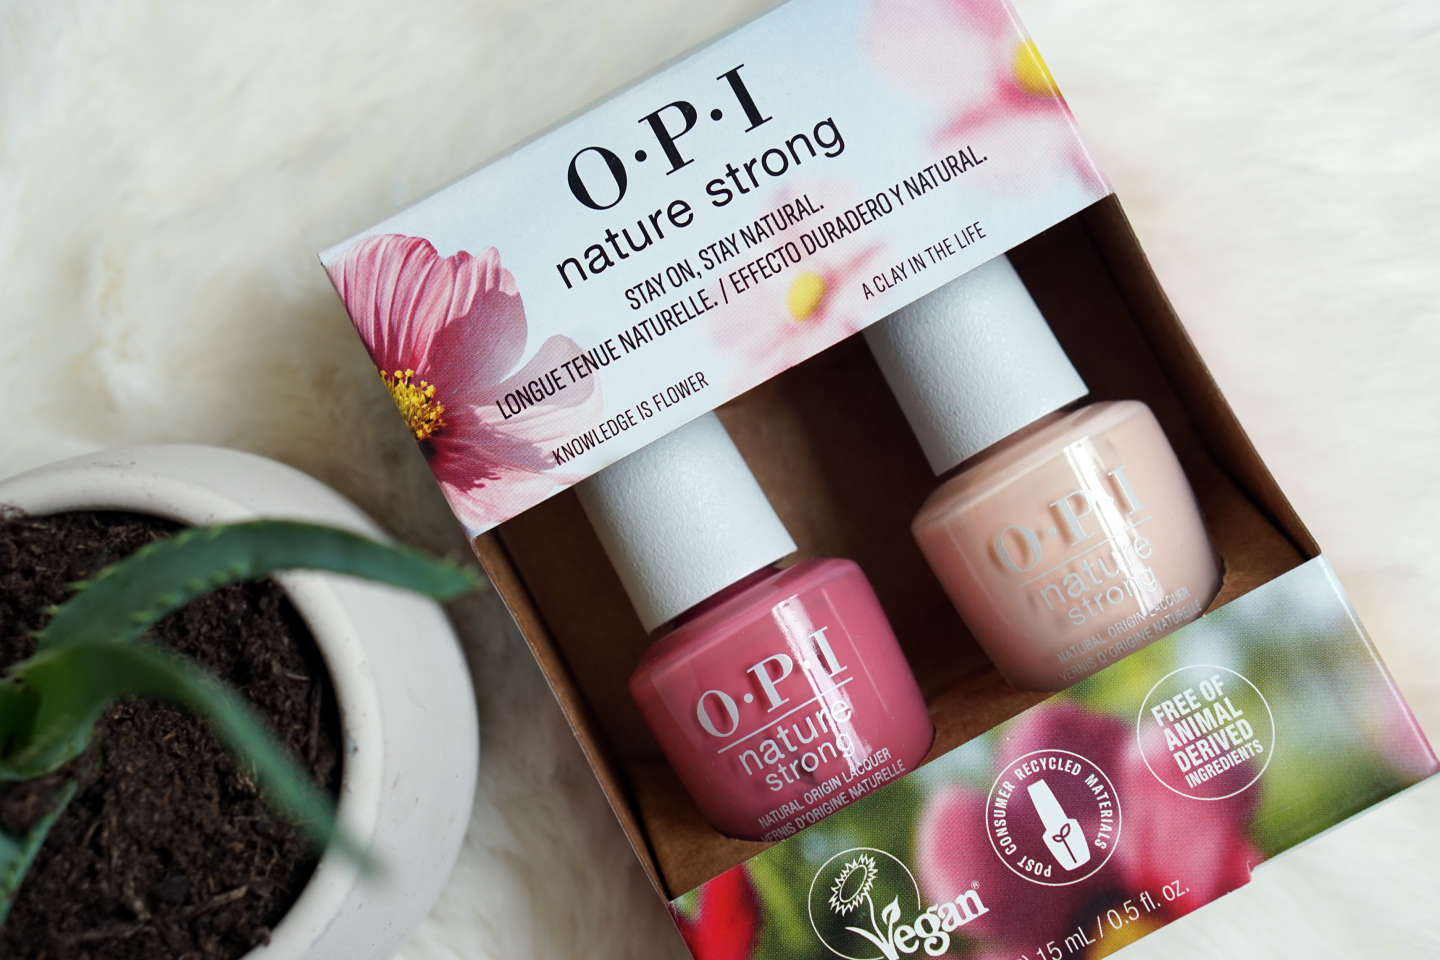 OPI Nature strong review